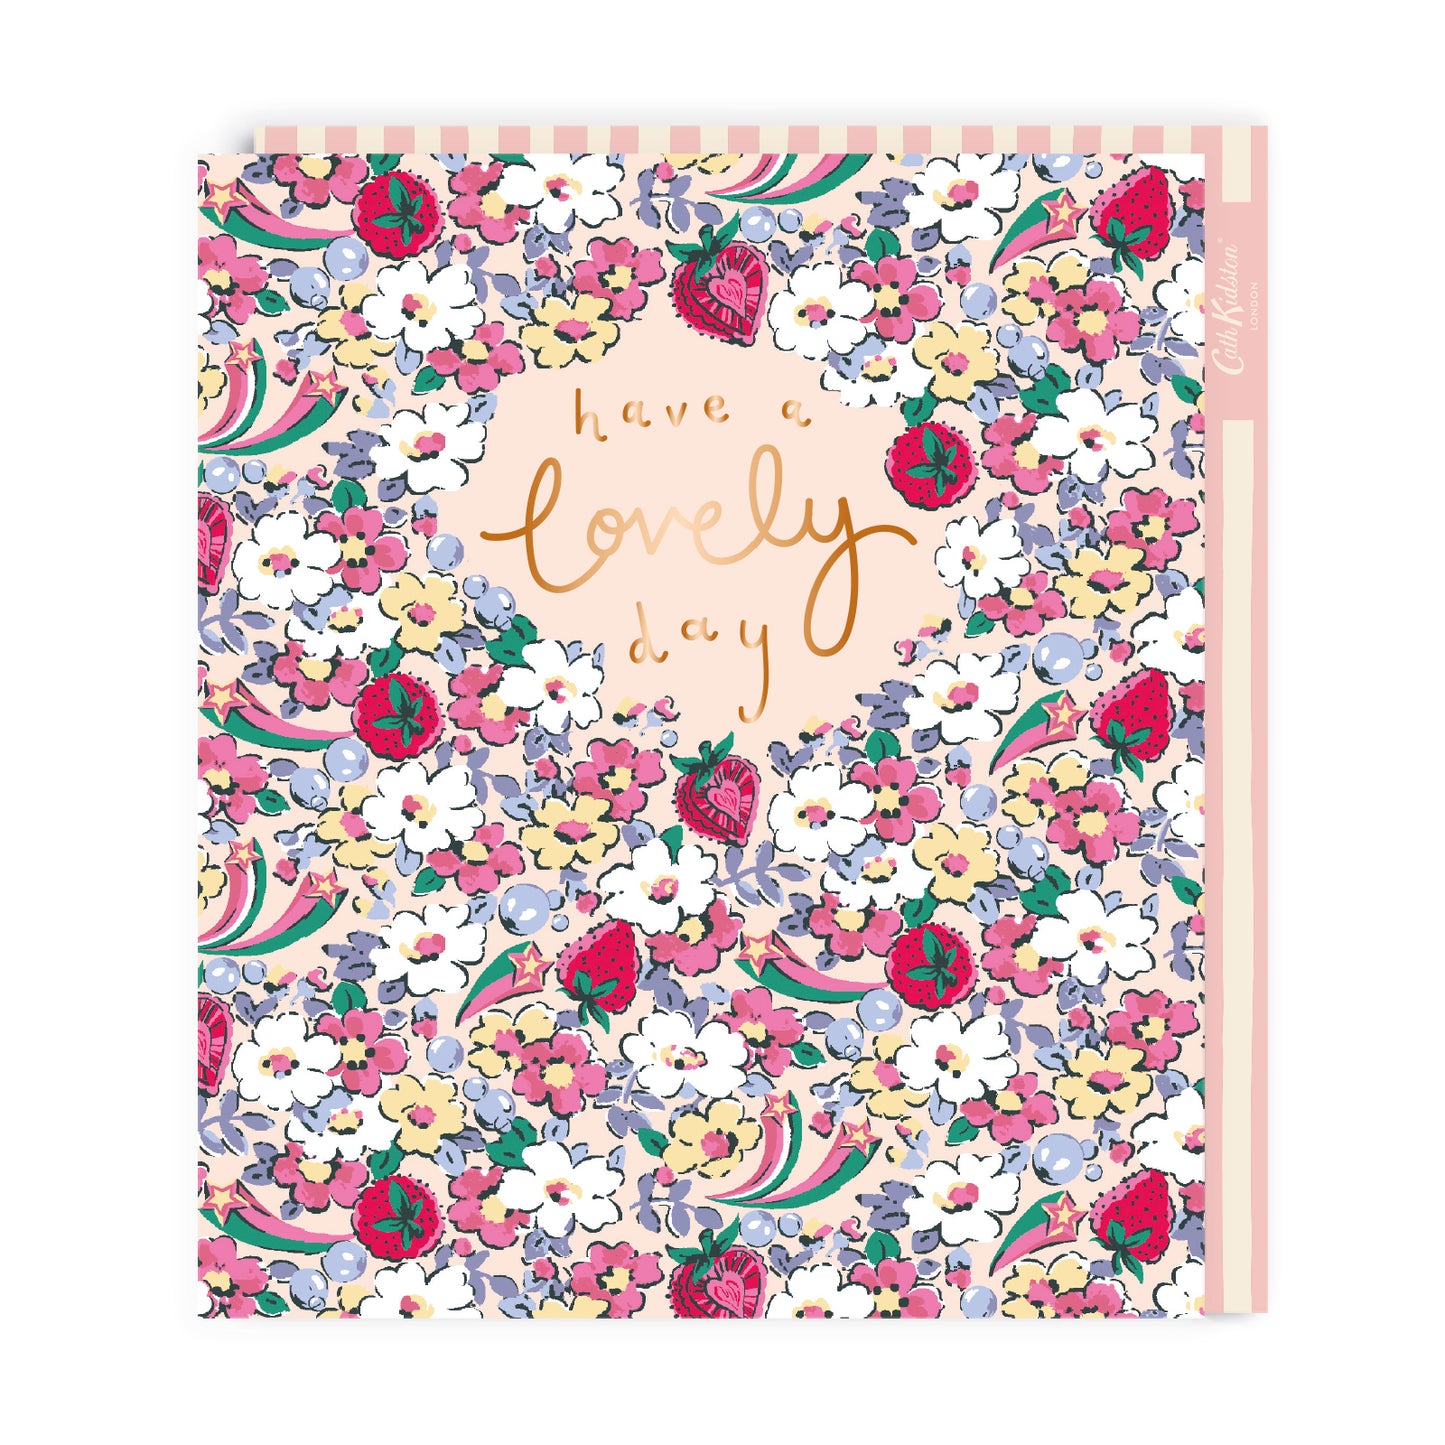 Cath Kidston Have a Lovely Day - Self Care Ditsy Large Birthday Greeting Card